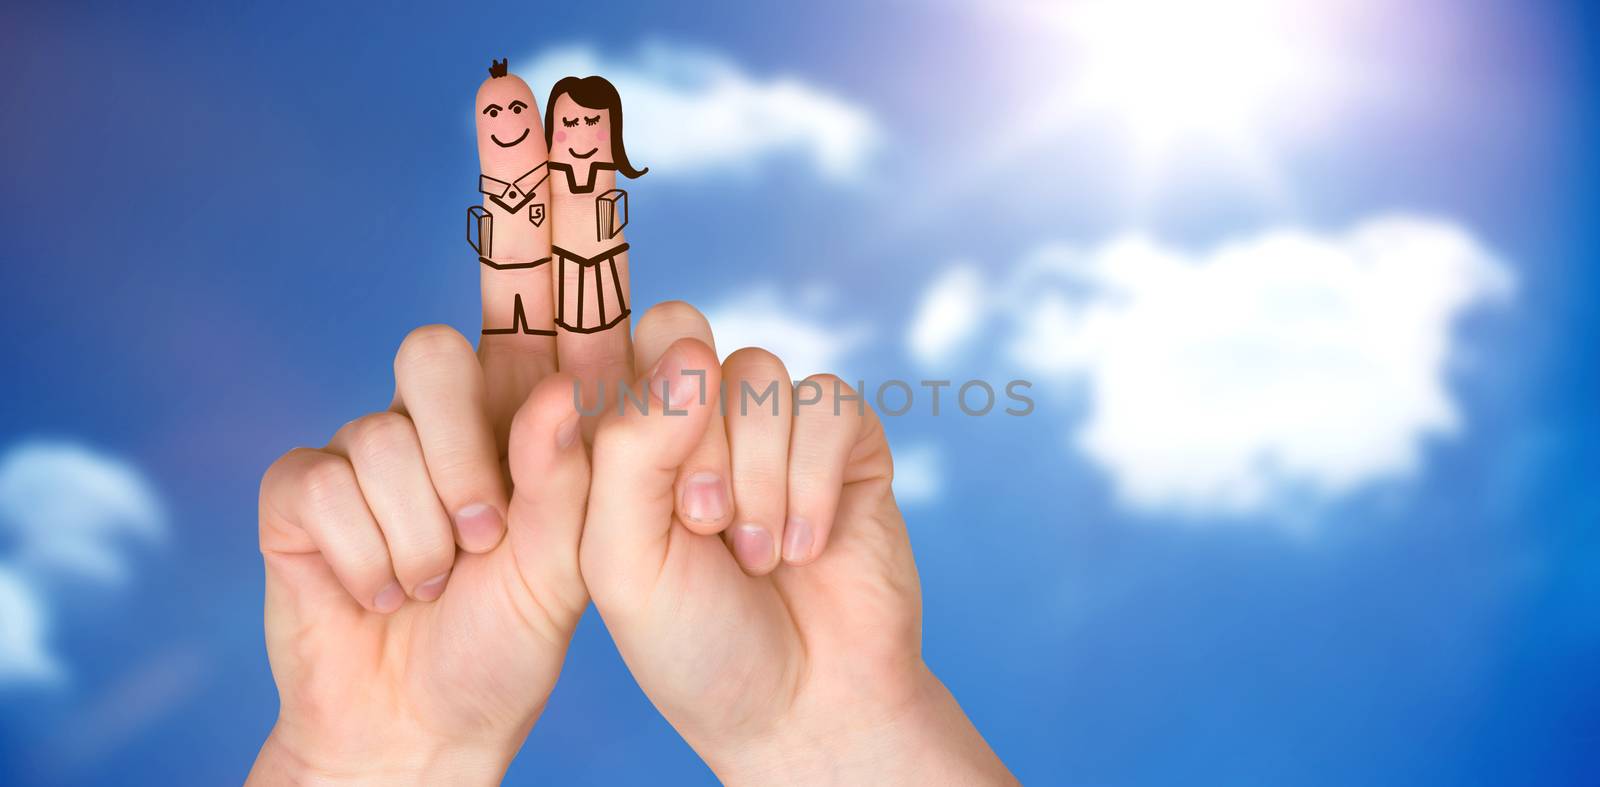 Composite image of fingers posed as students by Wavebreakmedia